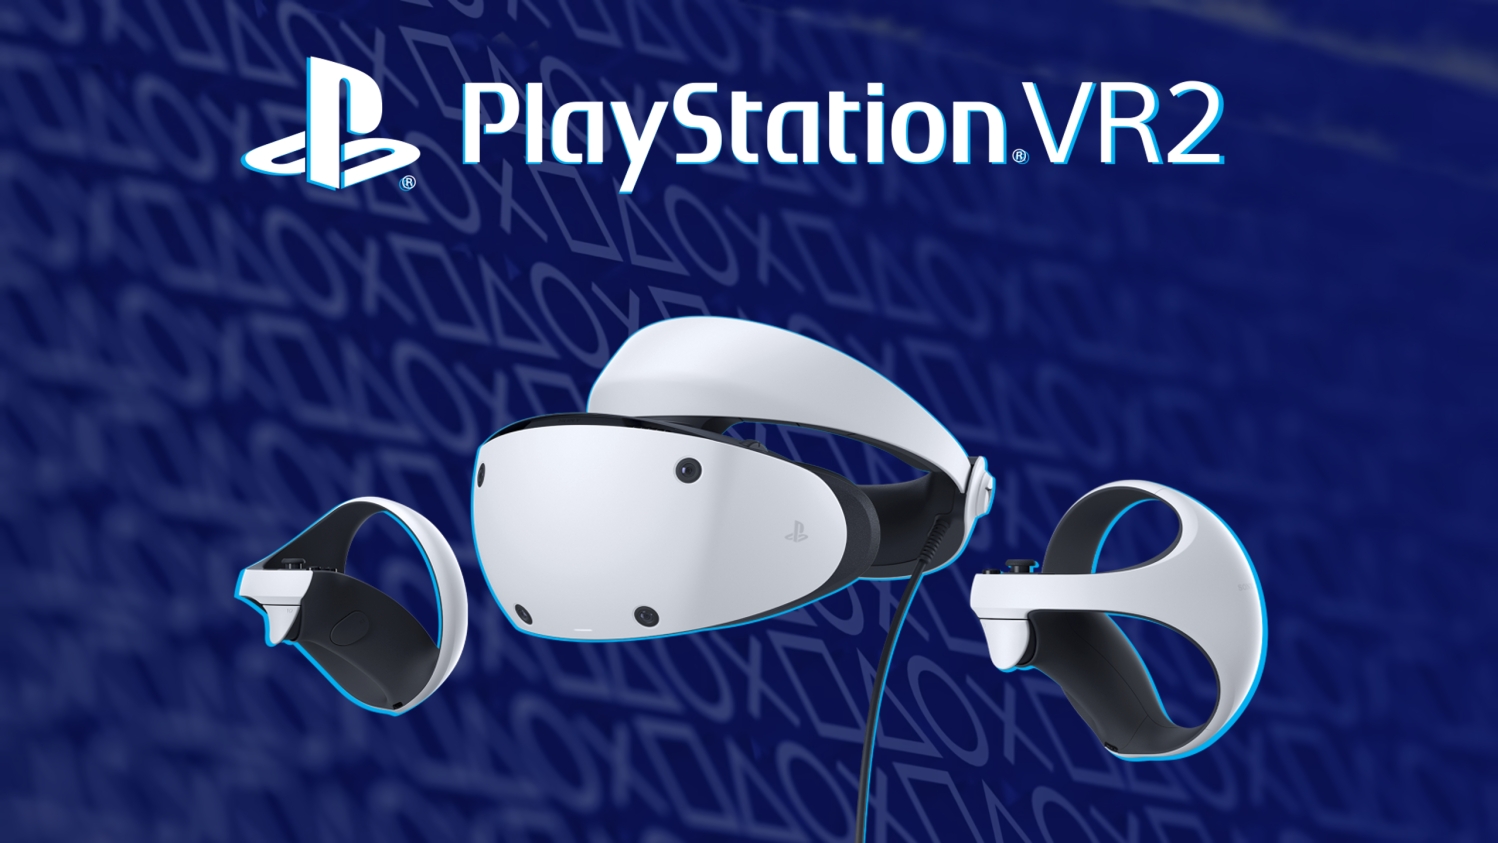 Sounds like the PS5 PSVR2 is getting the biggest VR game out there 👀